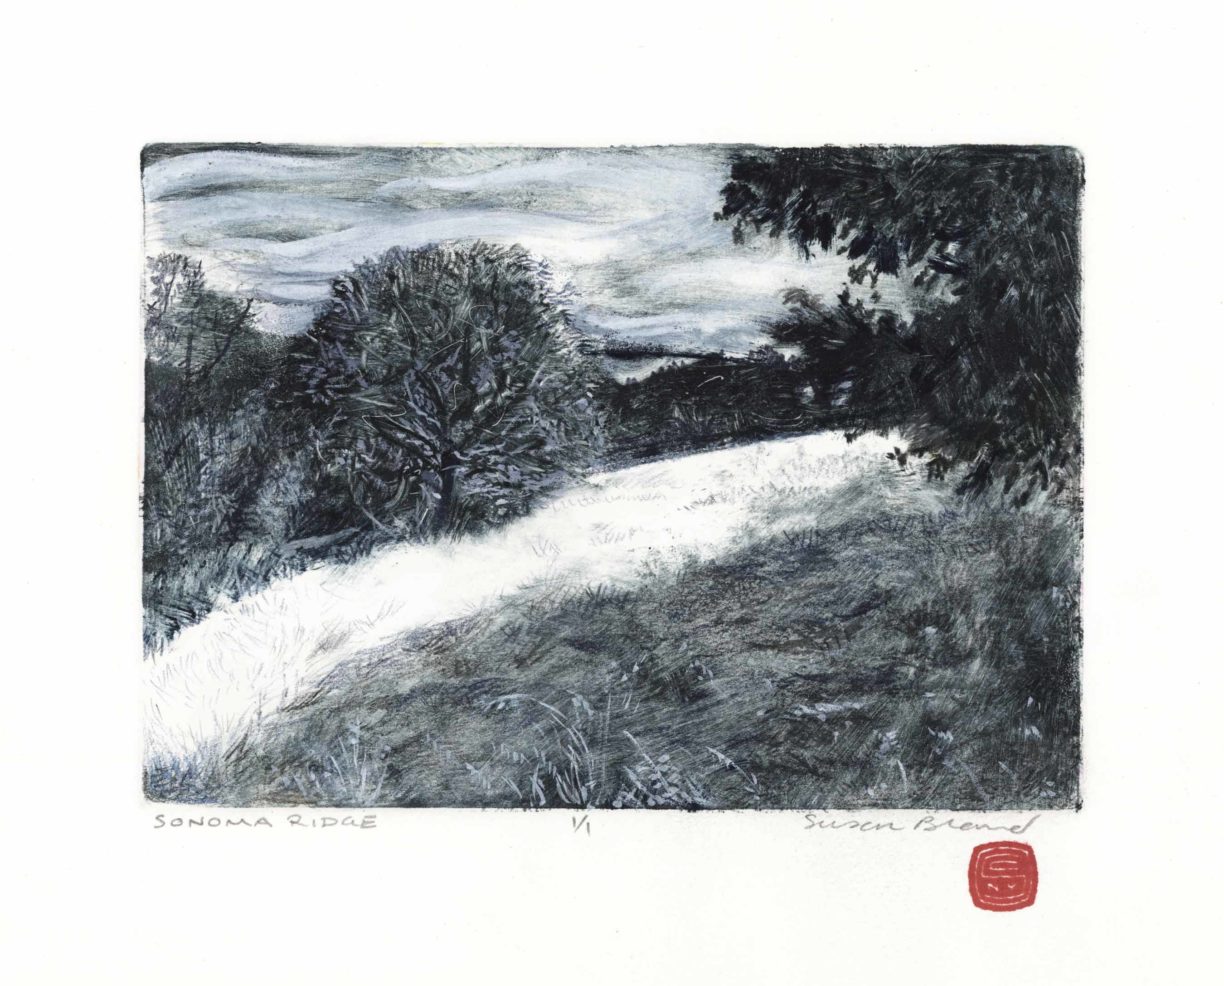 Sonoma Ridge, 5x7 inches, mixed media and monotype, Private Collection